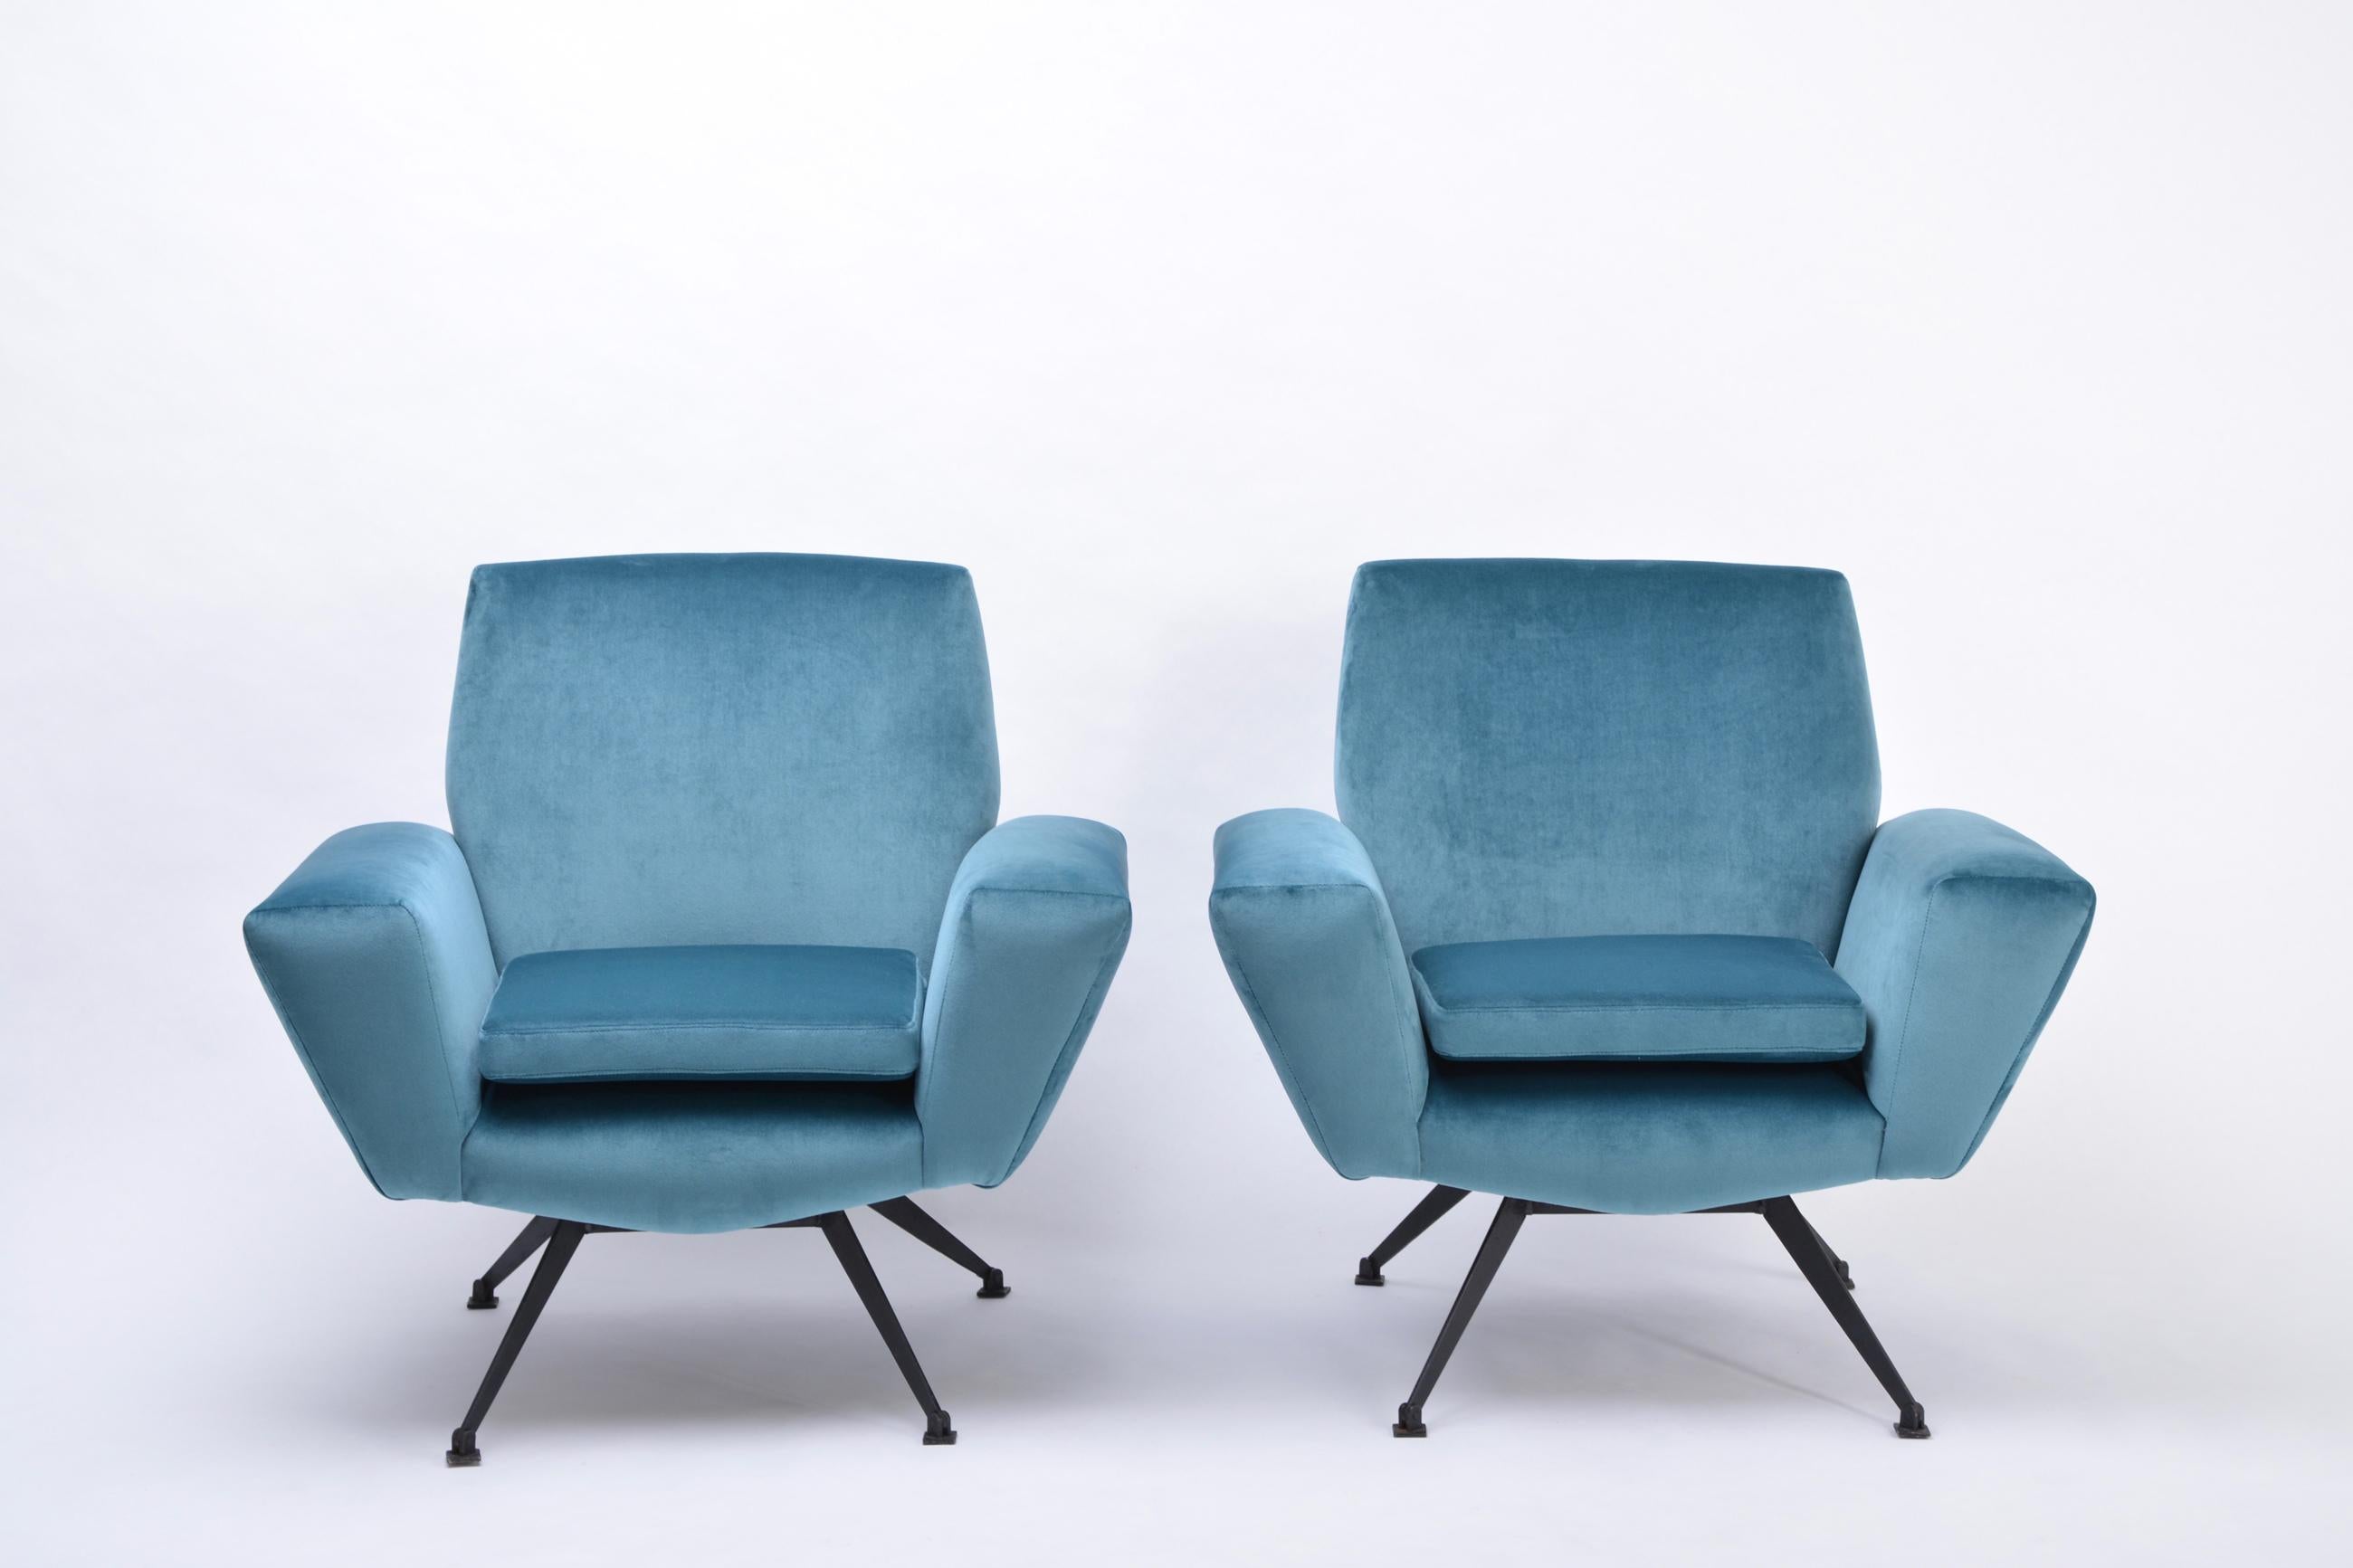 Pair of model 530 lounge chairs by Lenzi produced in Italy in the 1950s. The base and the four legs are made of a black metal. The chairs have been reupholstered in a beautiful blue colored velvet fabric. Cushions are loose.